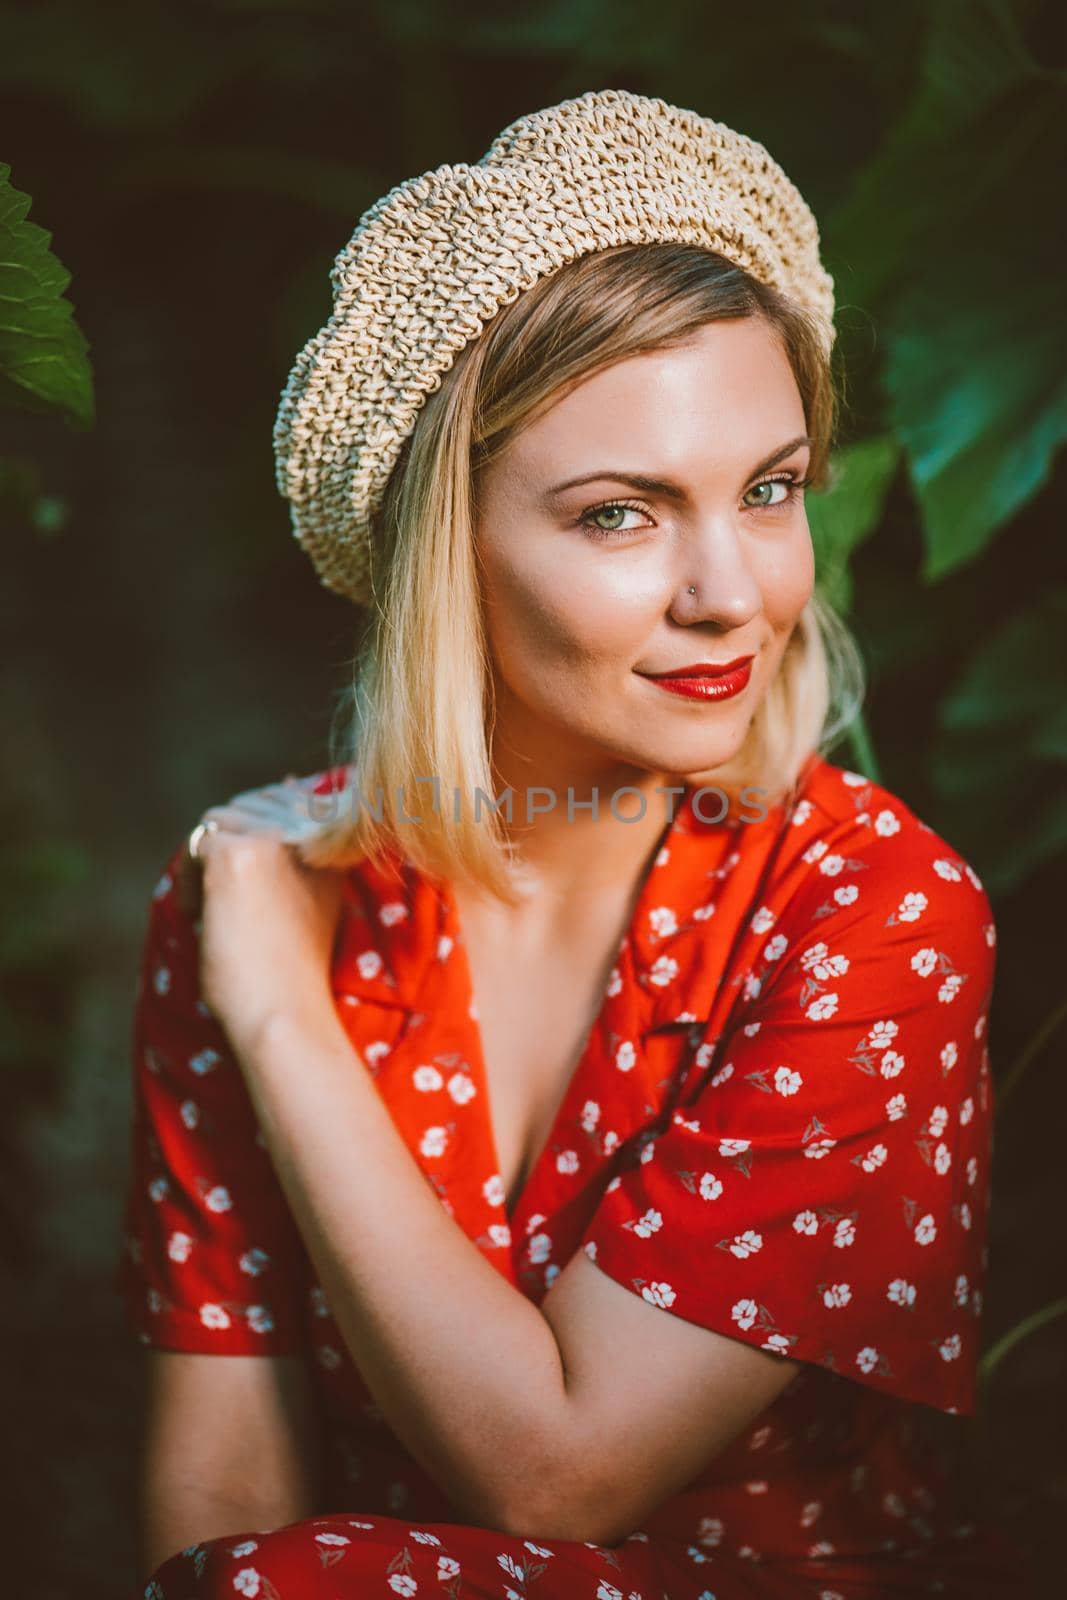 Beautiful portrait of attractive blonde woman in straw beret hat . Girl sitting between plants. Nature background. Retro floral dress, red lips. Pleasant feminine appearance, kind smile. .